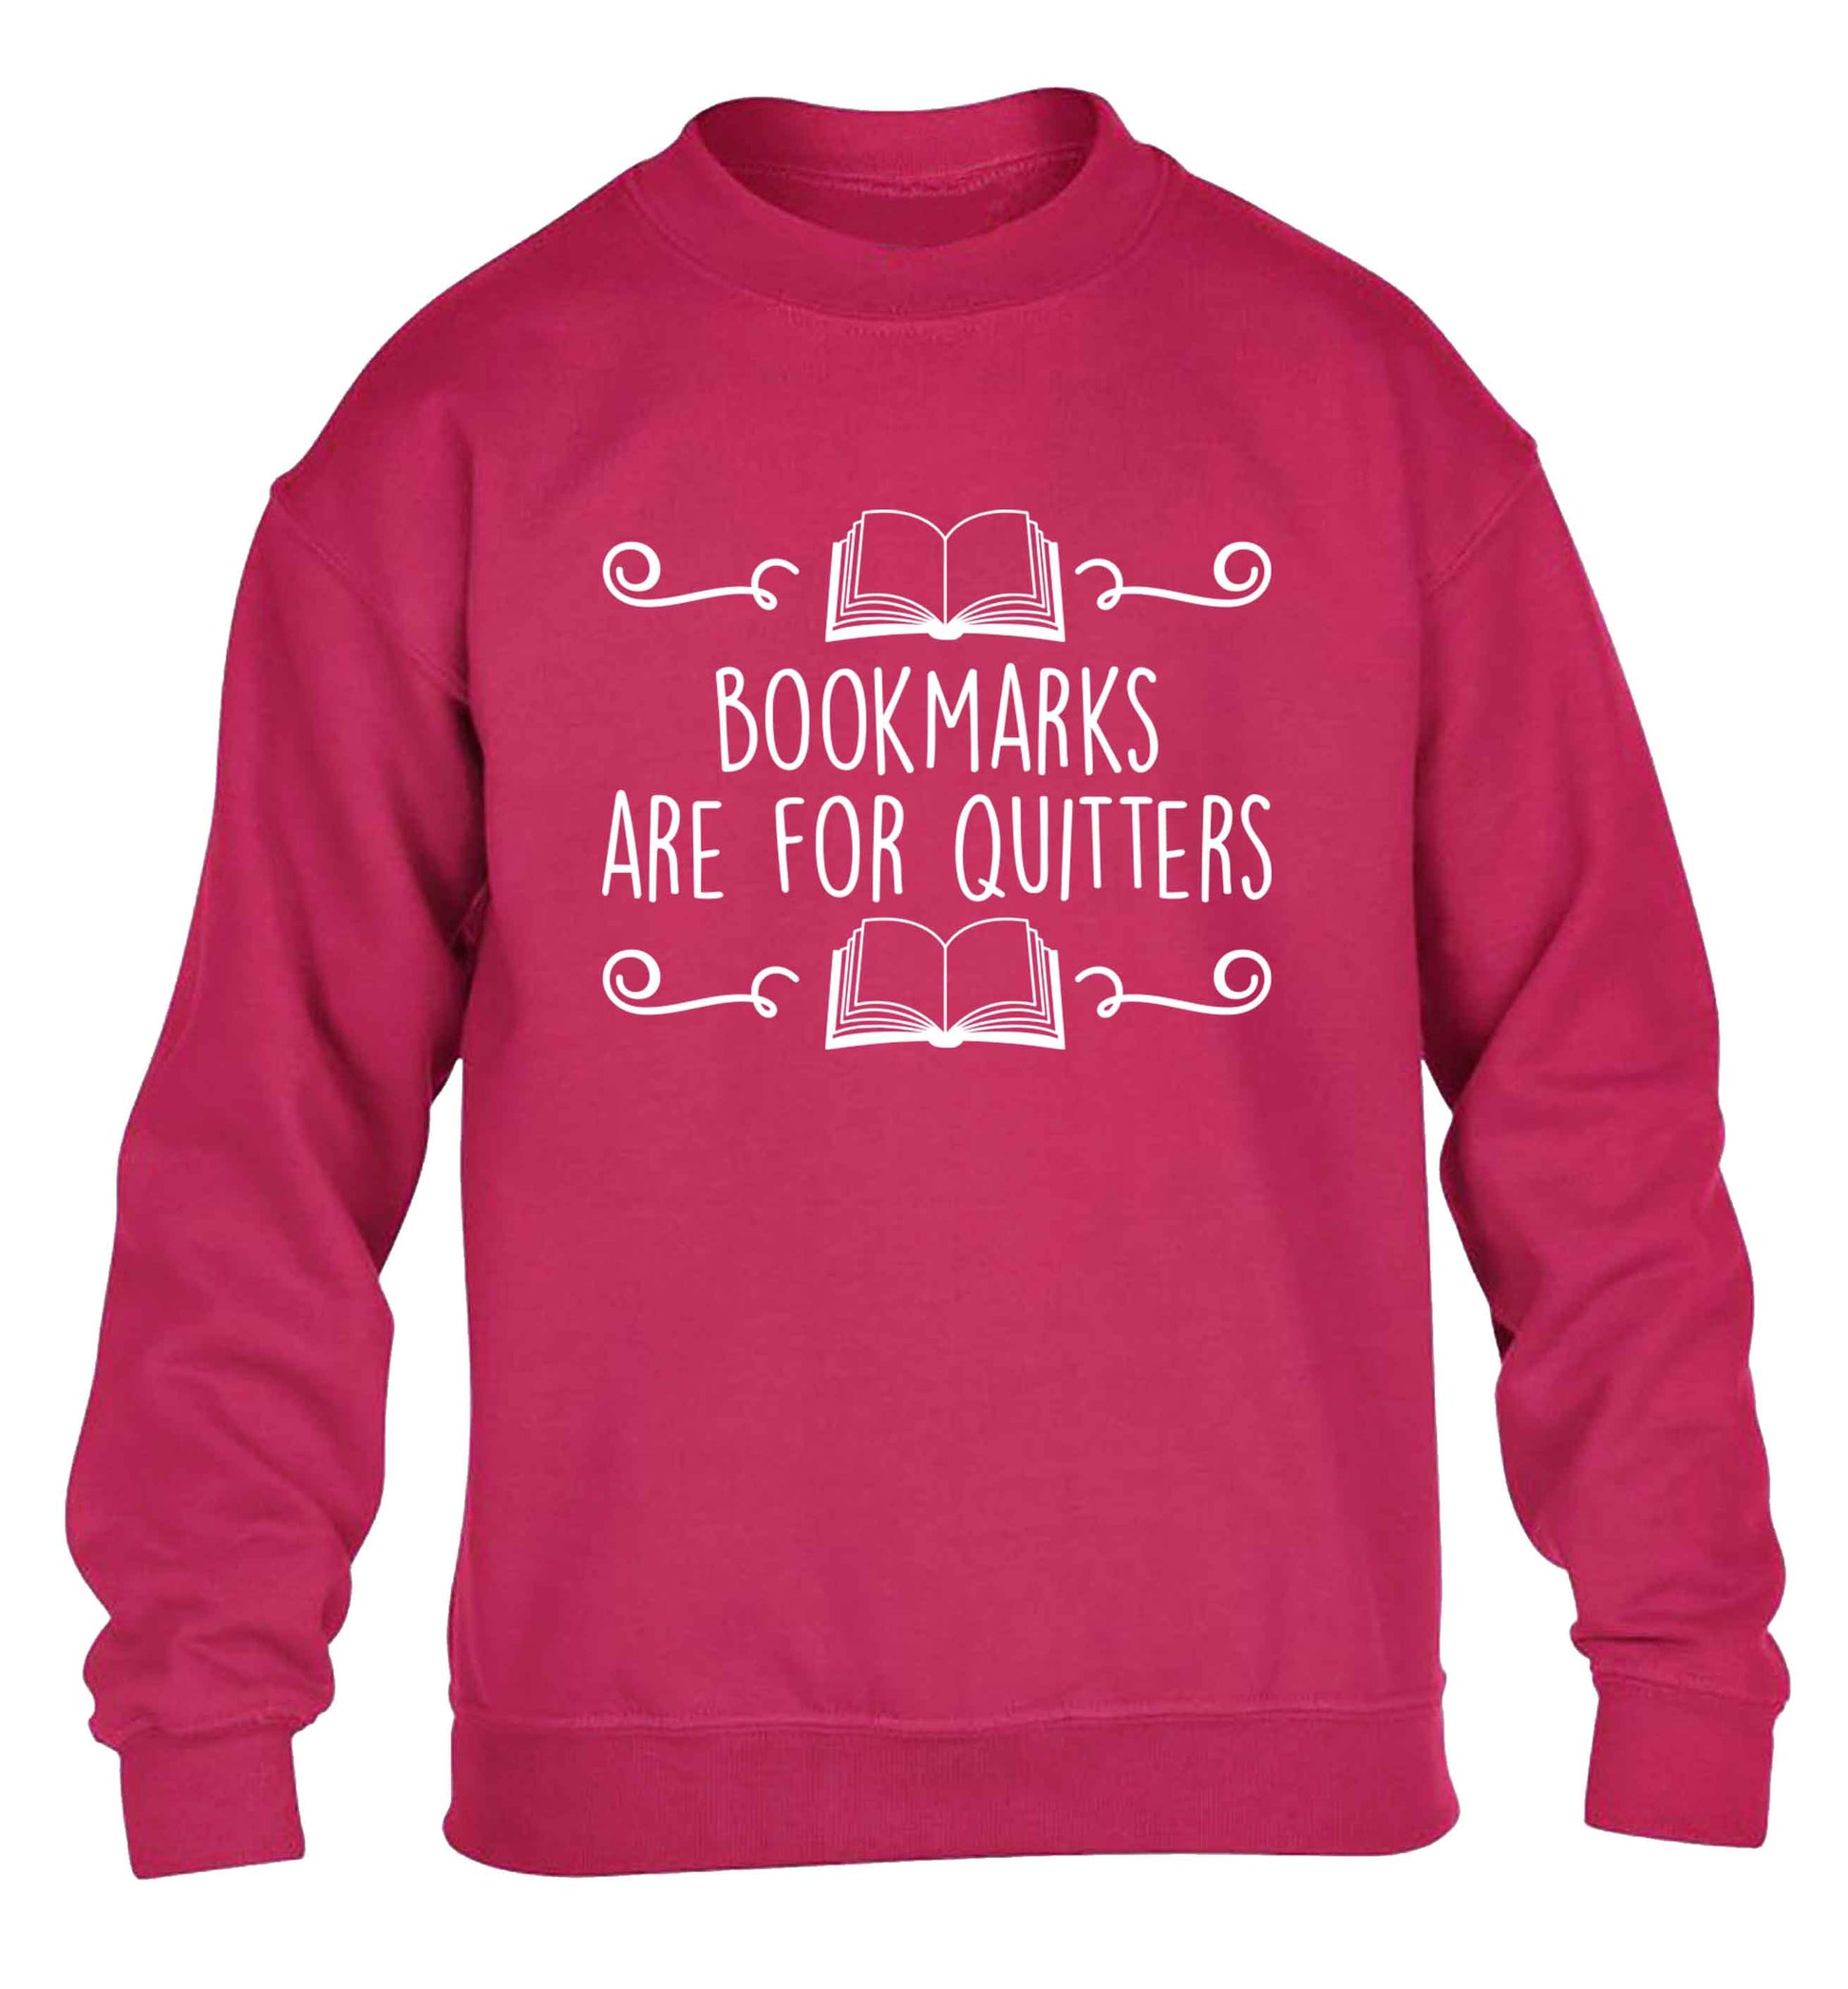 Bookmarks are for quitters children's pink sweater 12-13 Years